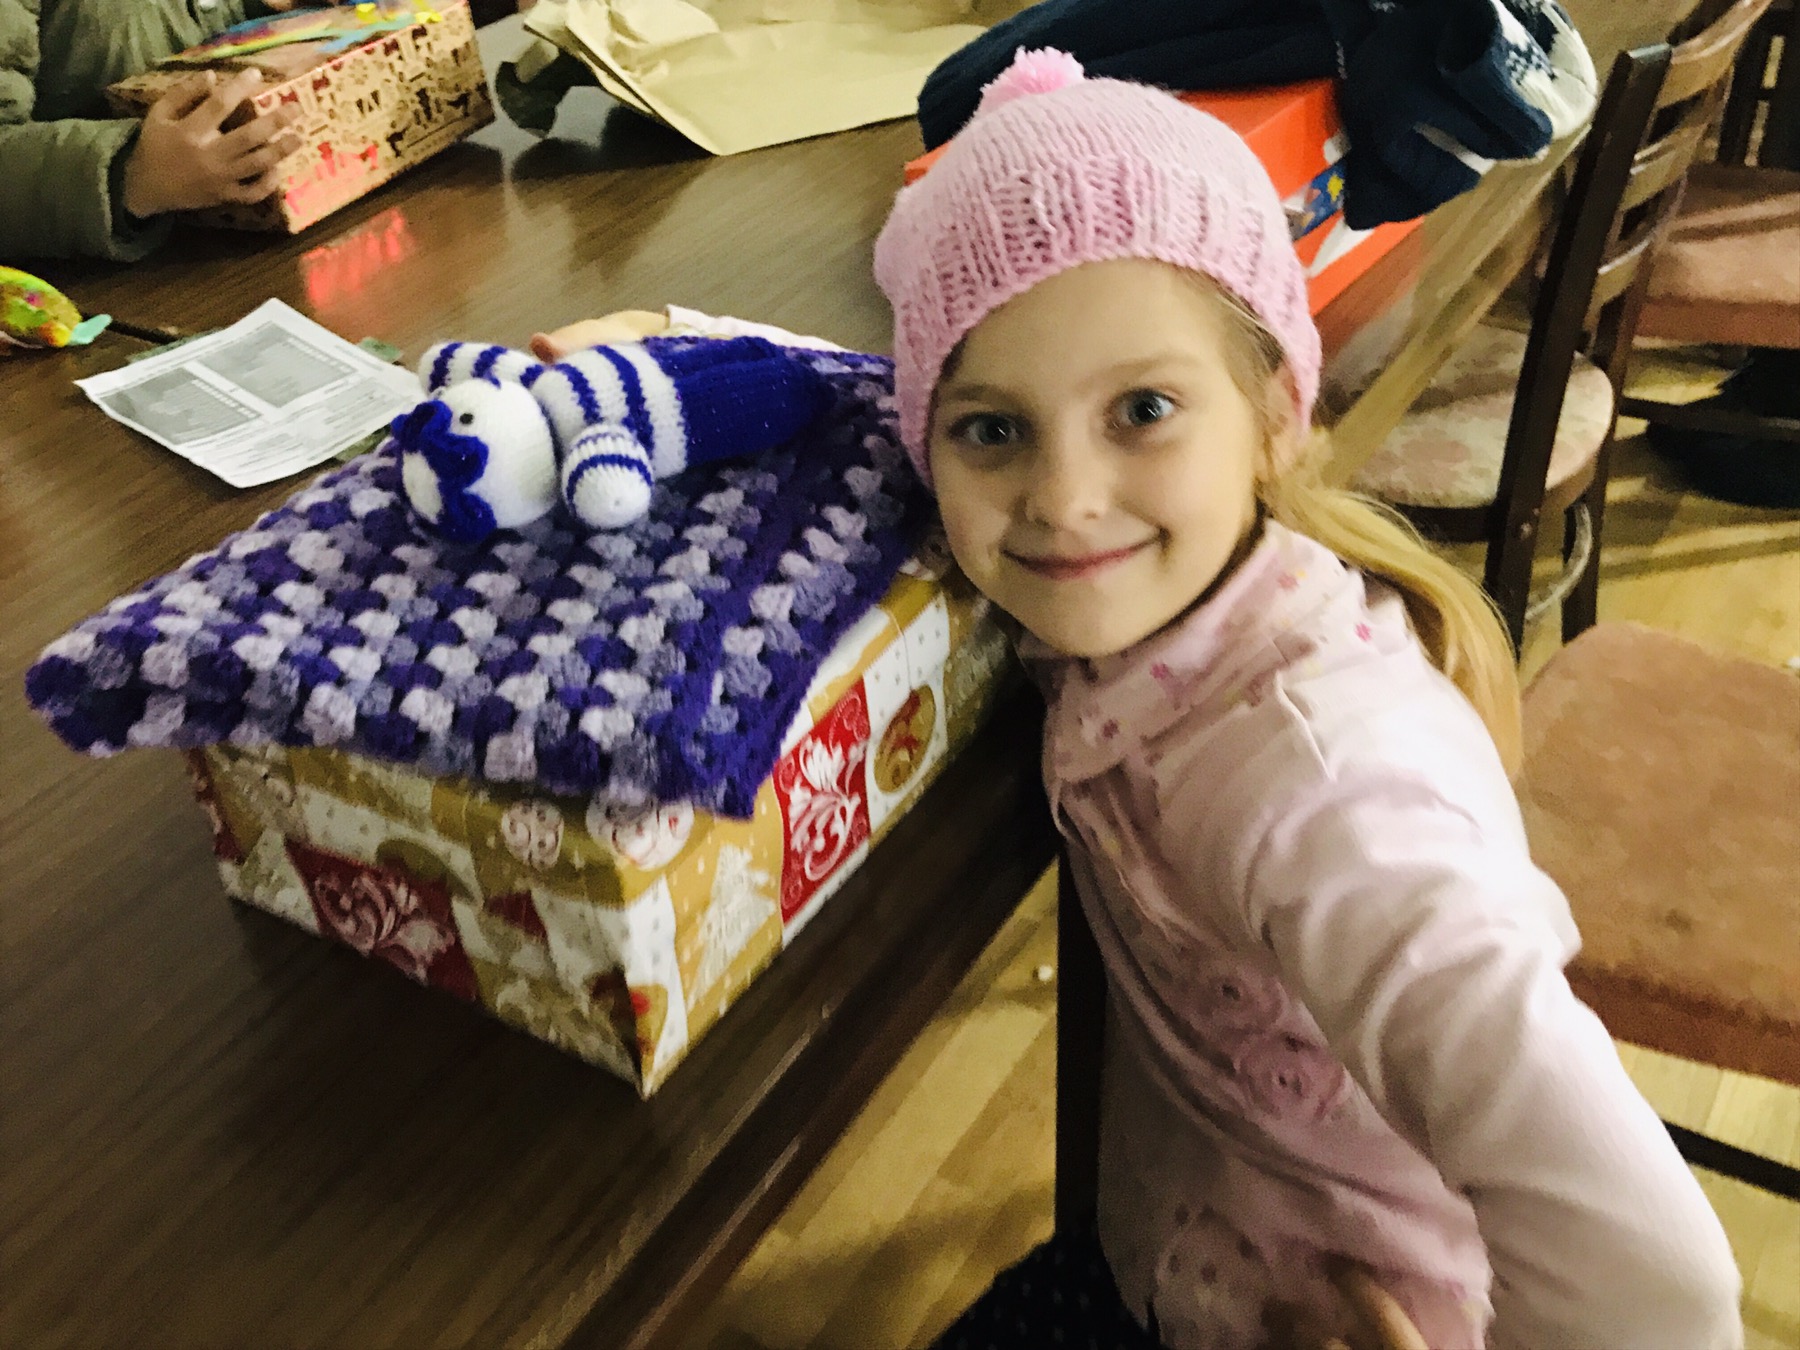 A young child receiving a shoebox courtesy of Link to Hope's Shoebox Appeal